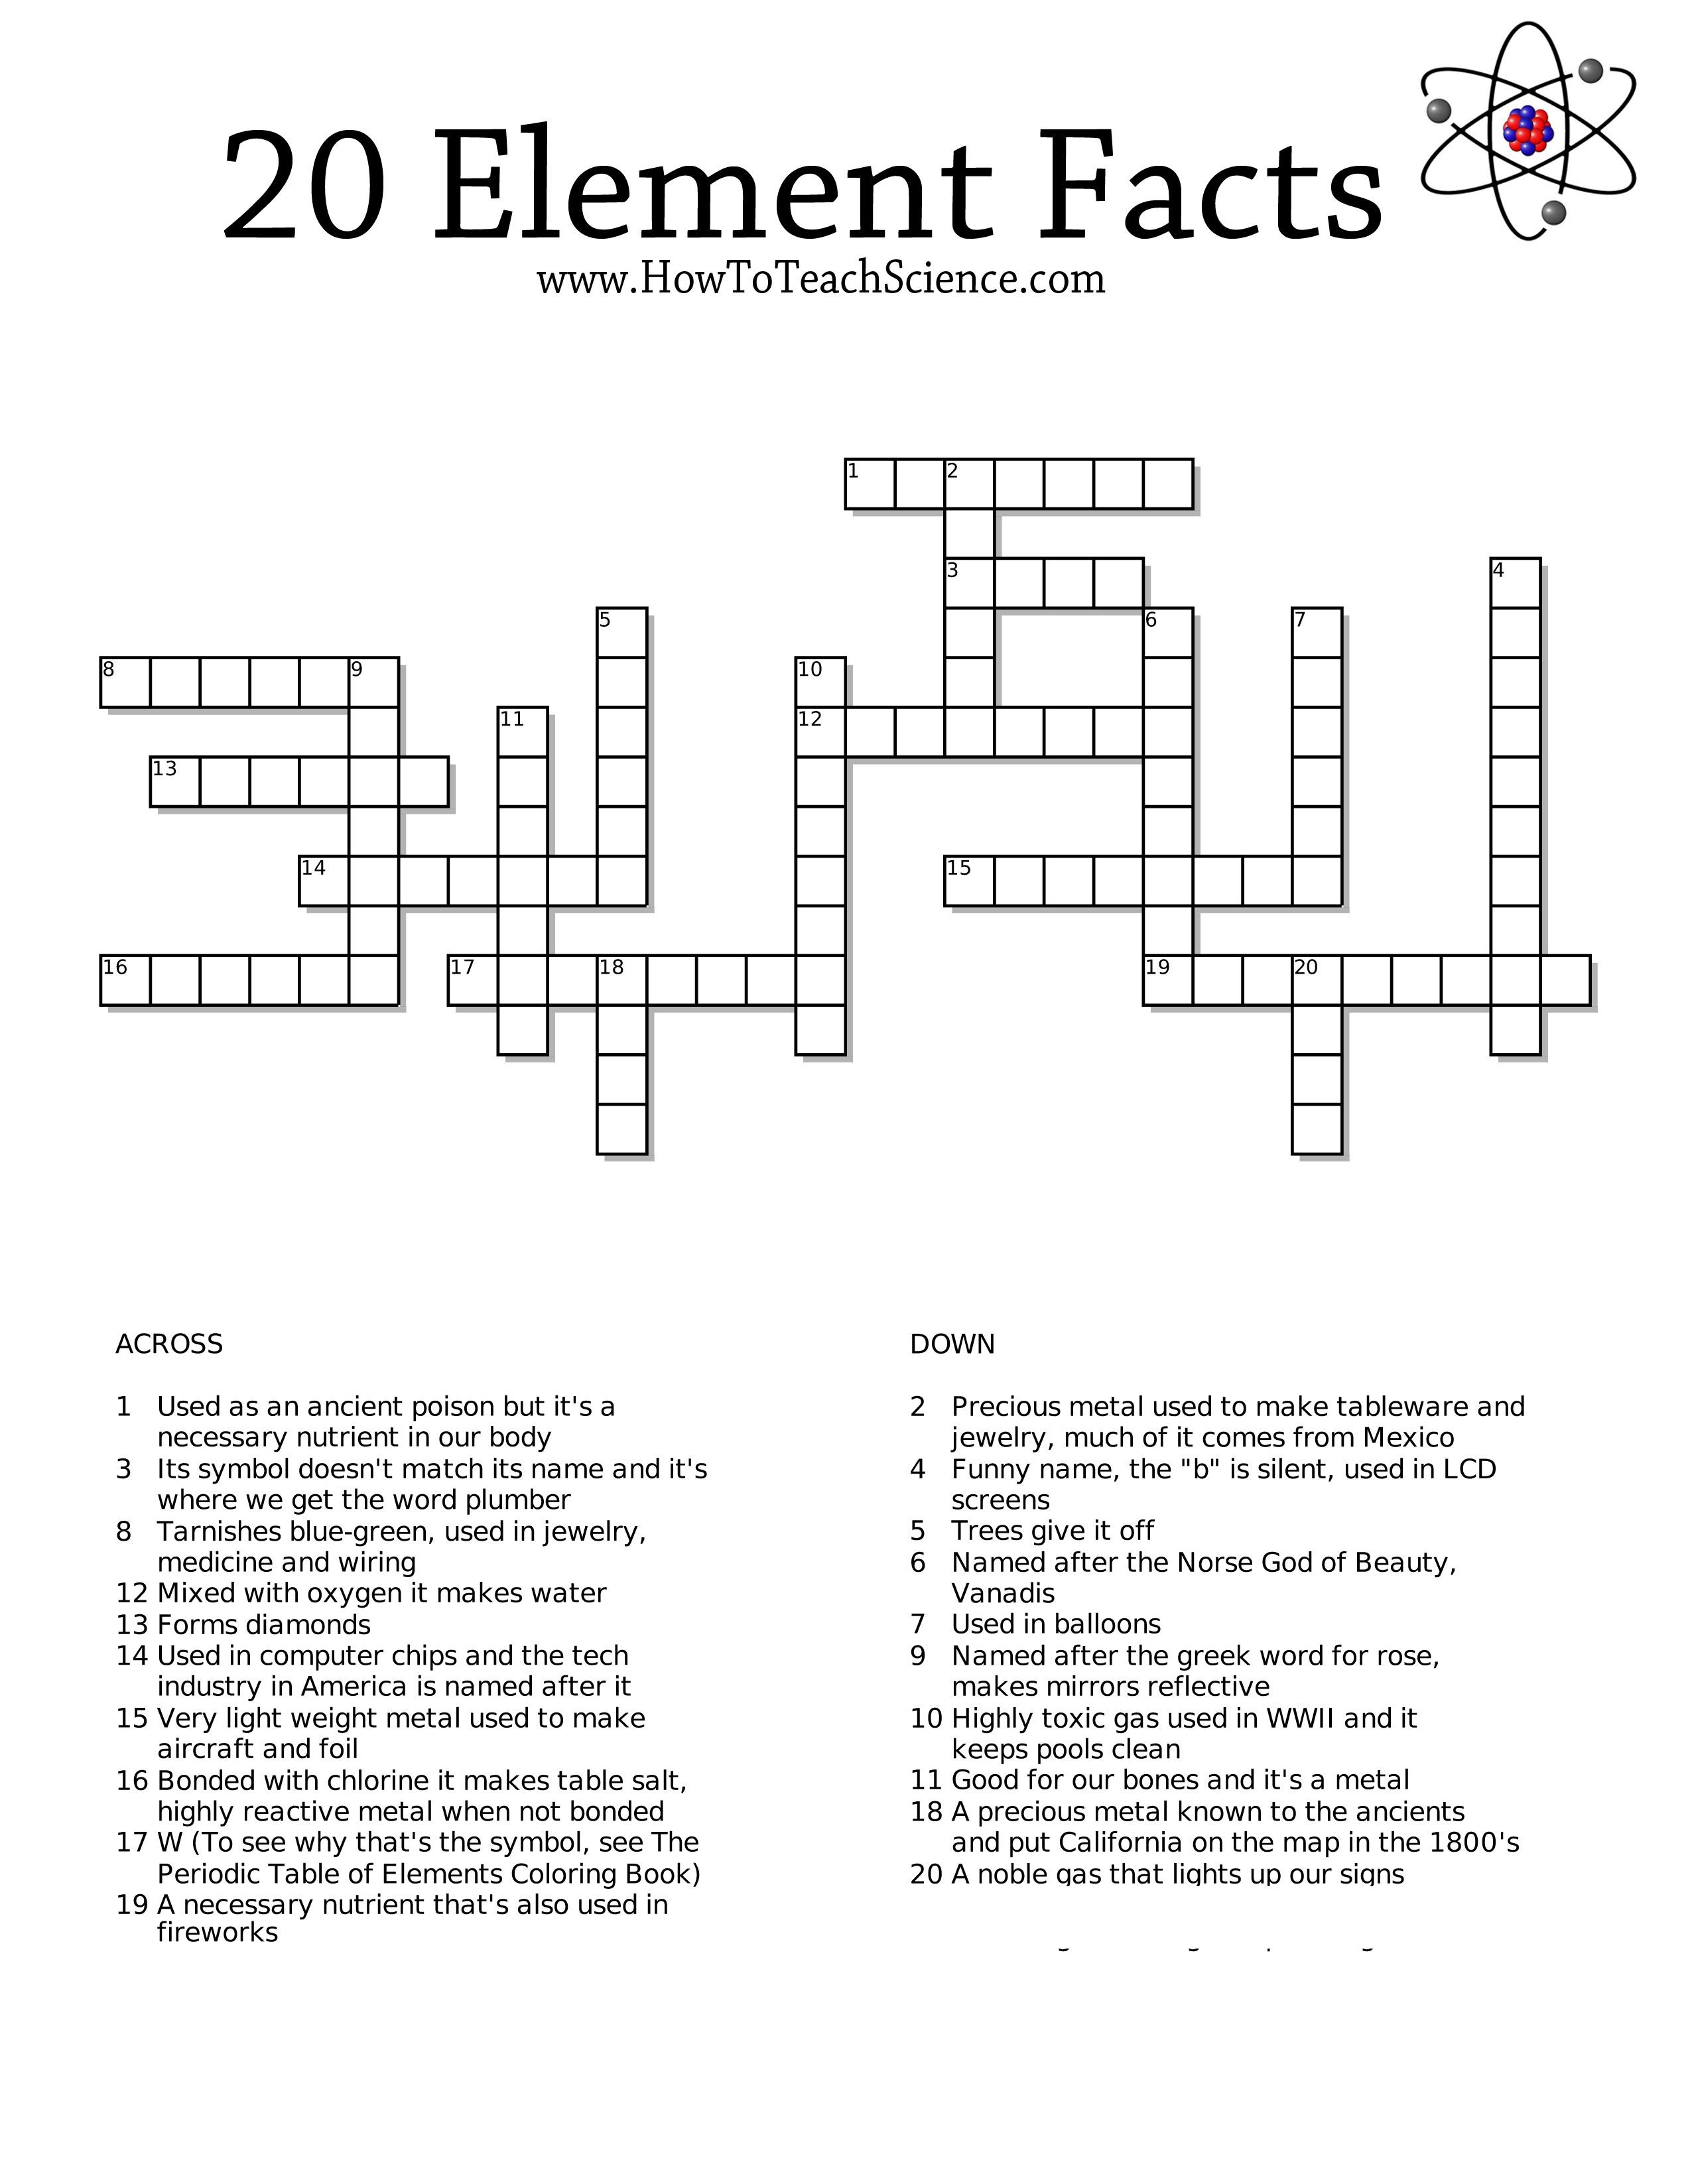 Free Crossword Printables On The Elements For 3Rd Grade Through High - Free Printable Crossword Puzzles For 7Th Graders